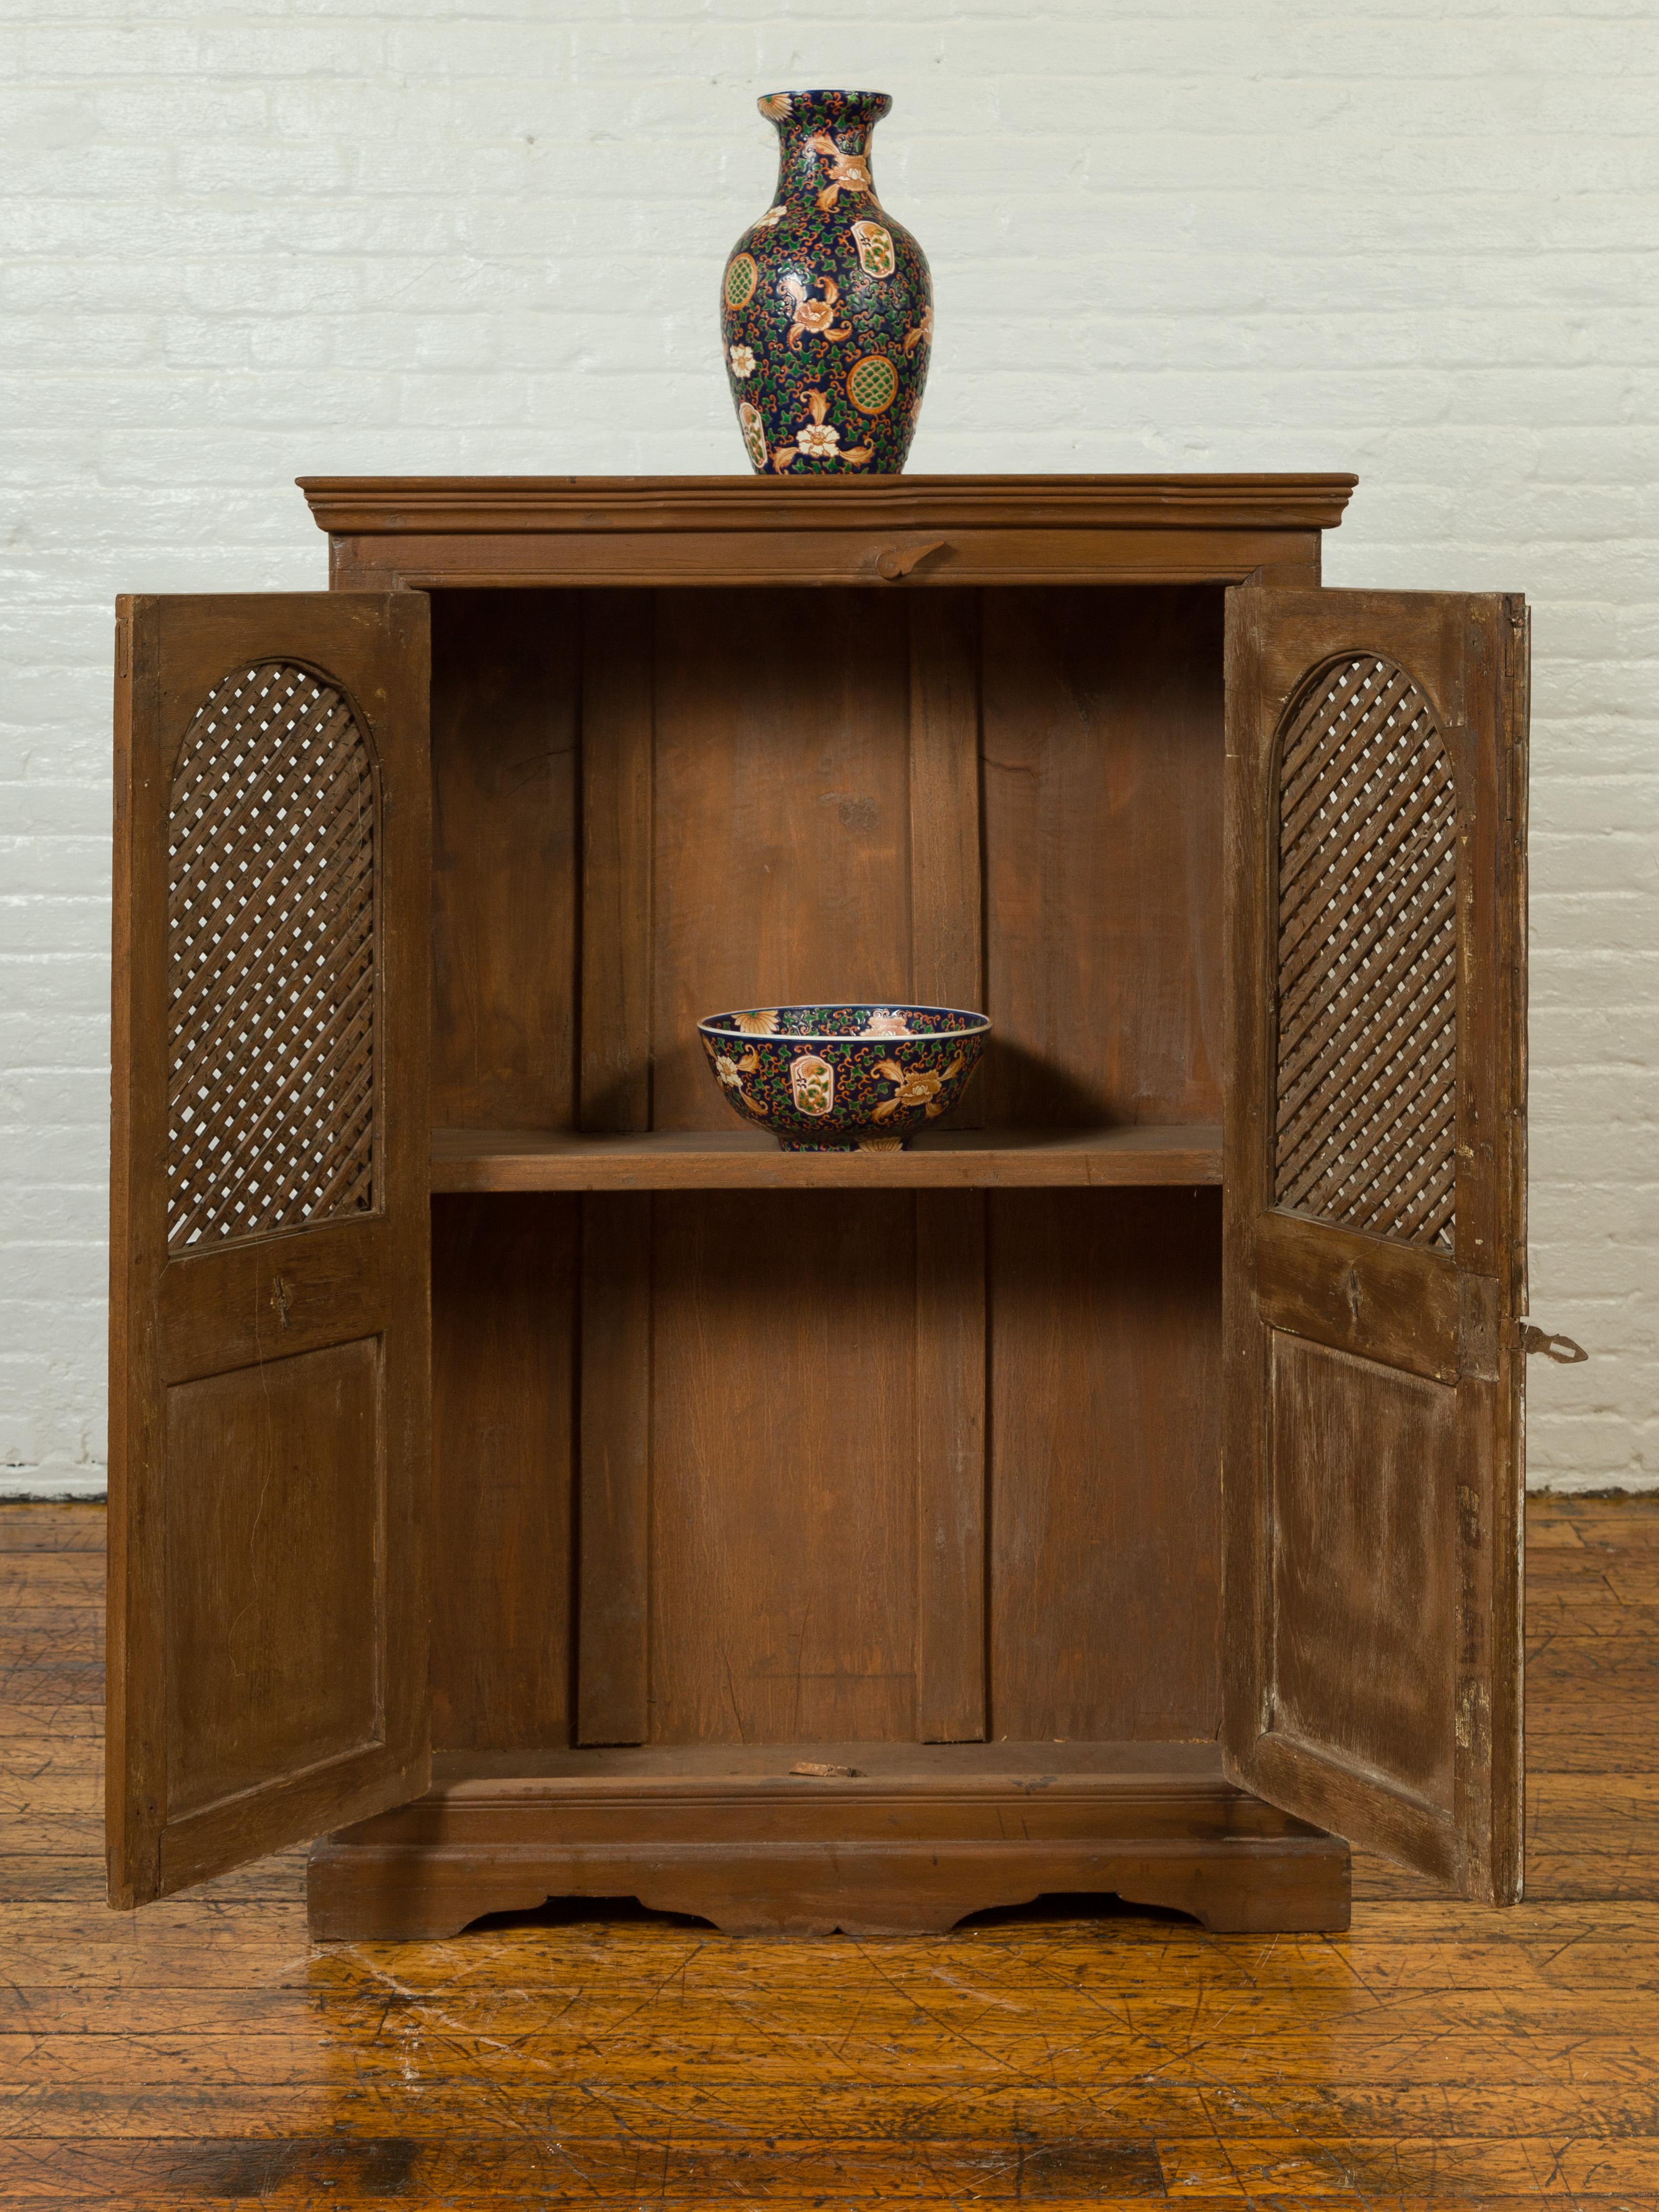 Indian 19th Century Cabinet with Metal Fretwork Motifs and Oval Medallions In Good Condition For Sale In Yonkers, NY